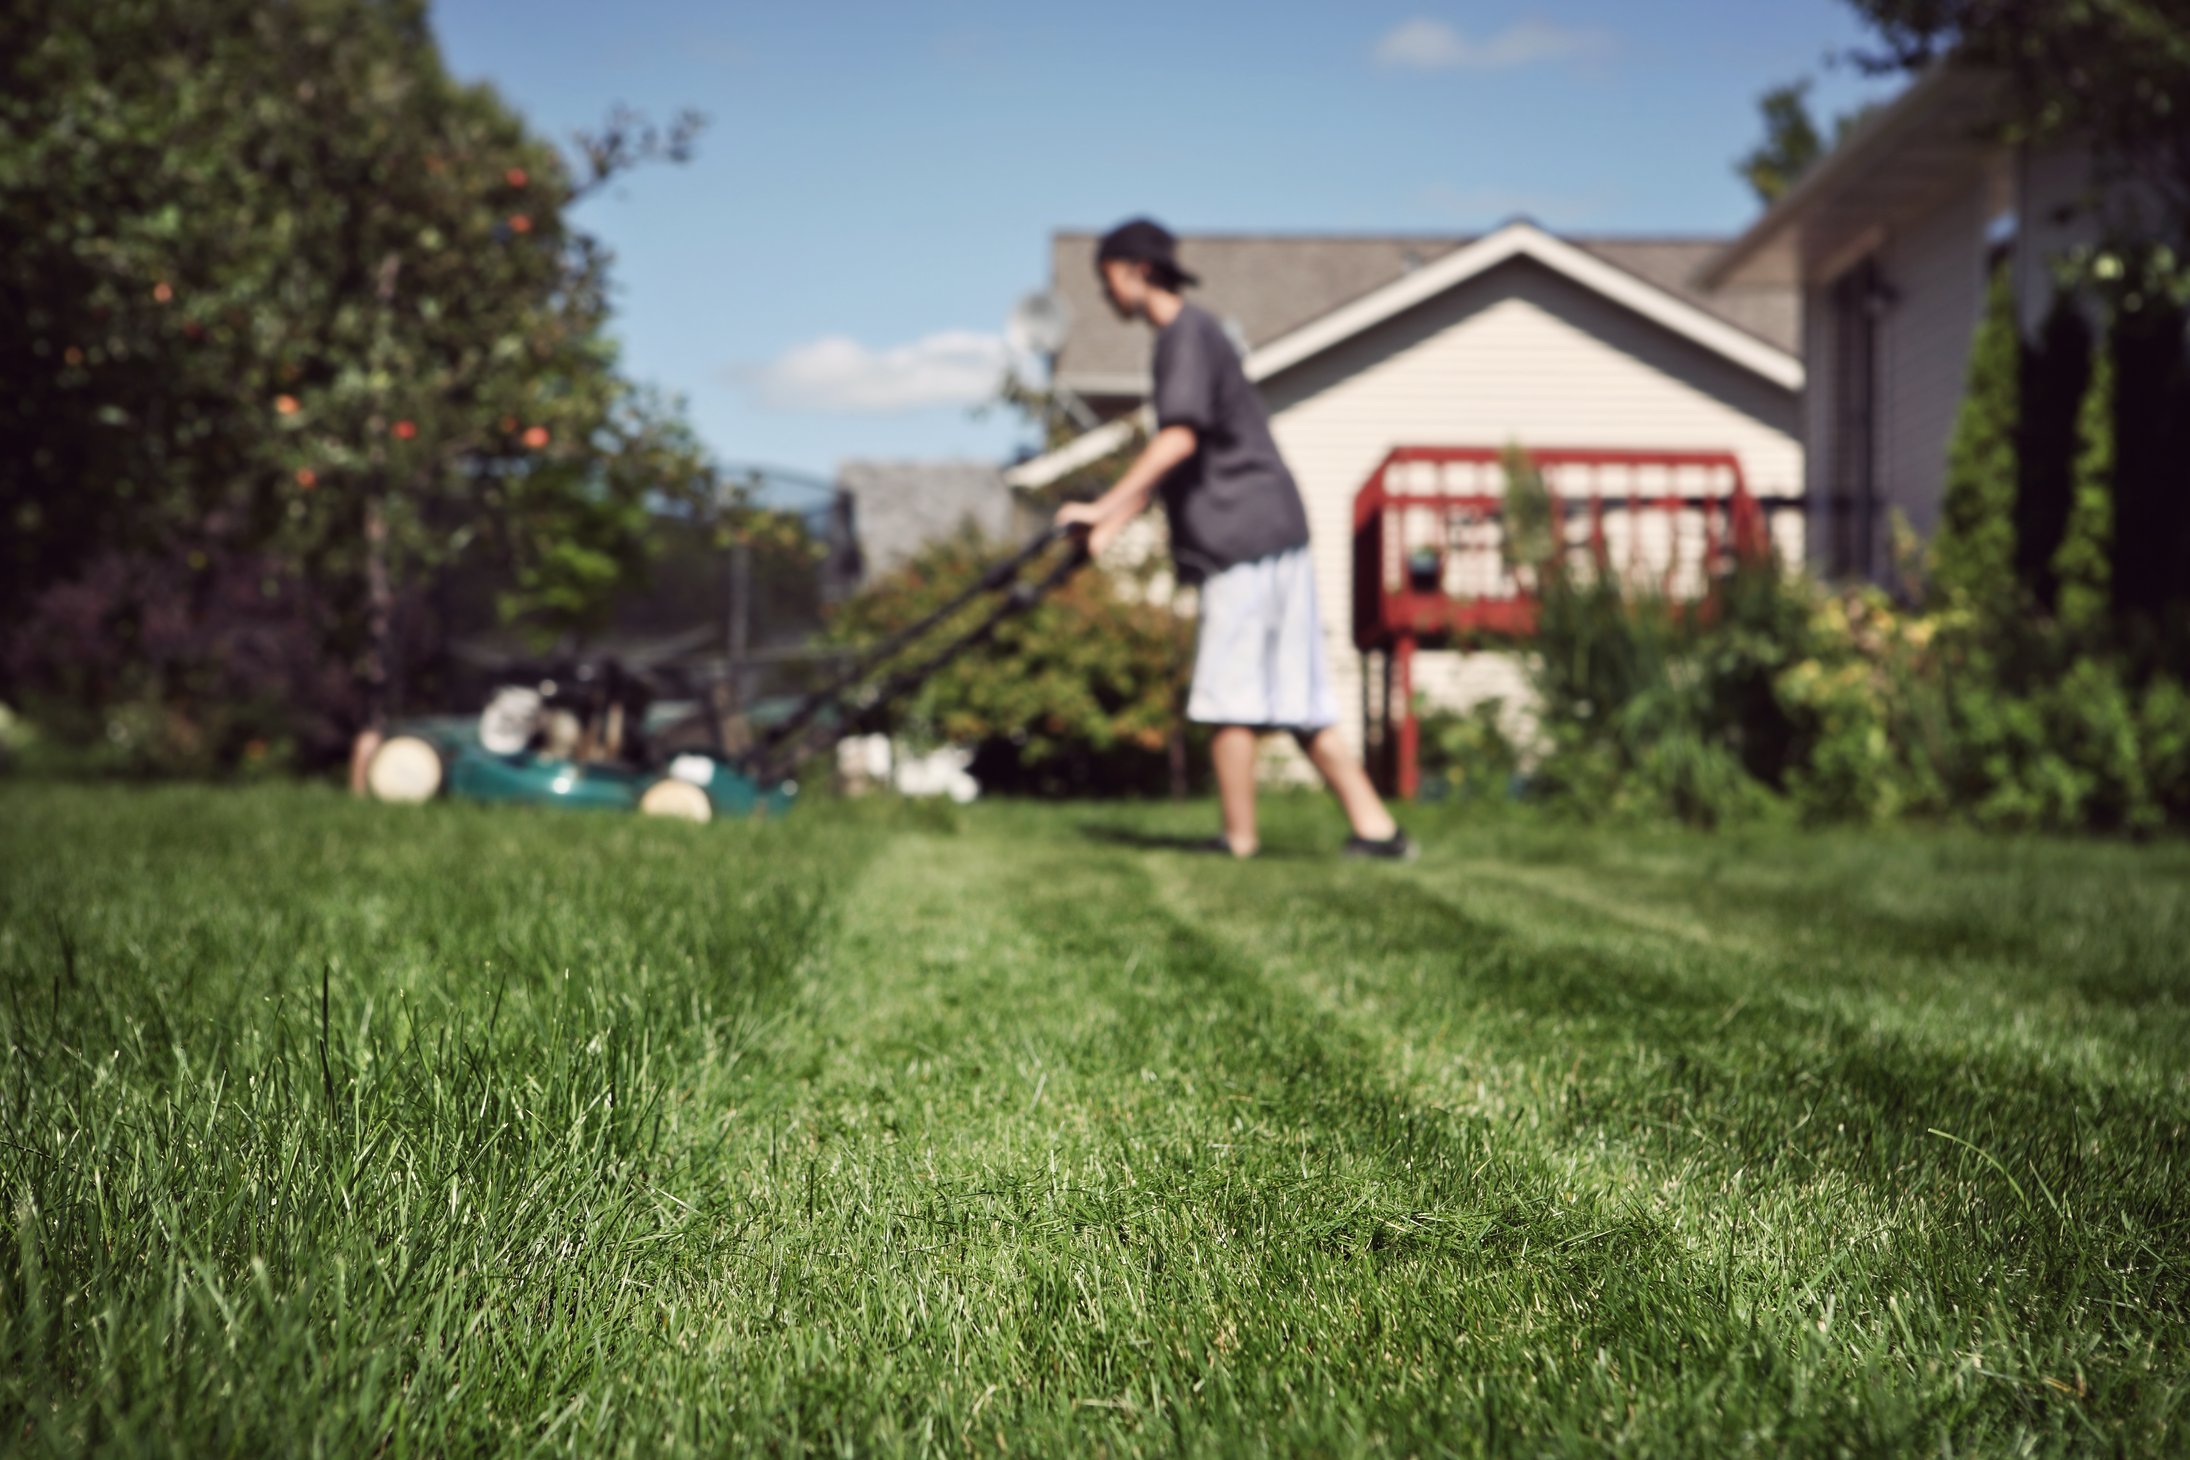 Mow the lawn. Don't walk on Lawns. Help around the House. Cleaning Dry Branches in the Yard of the House.